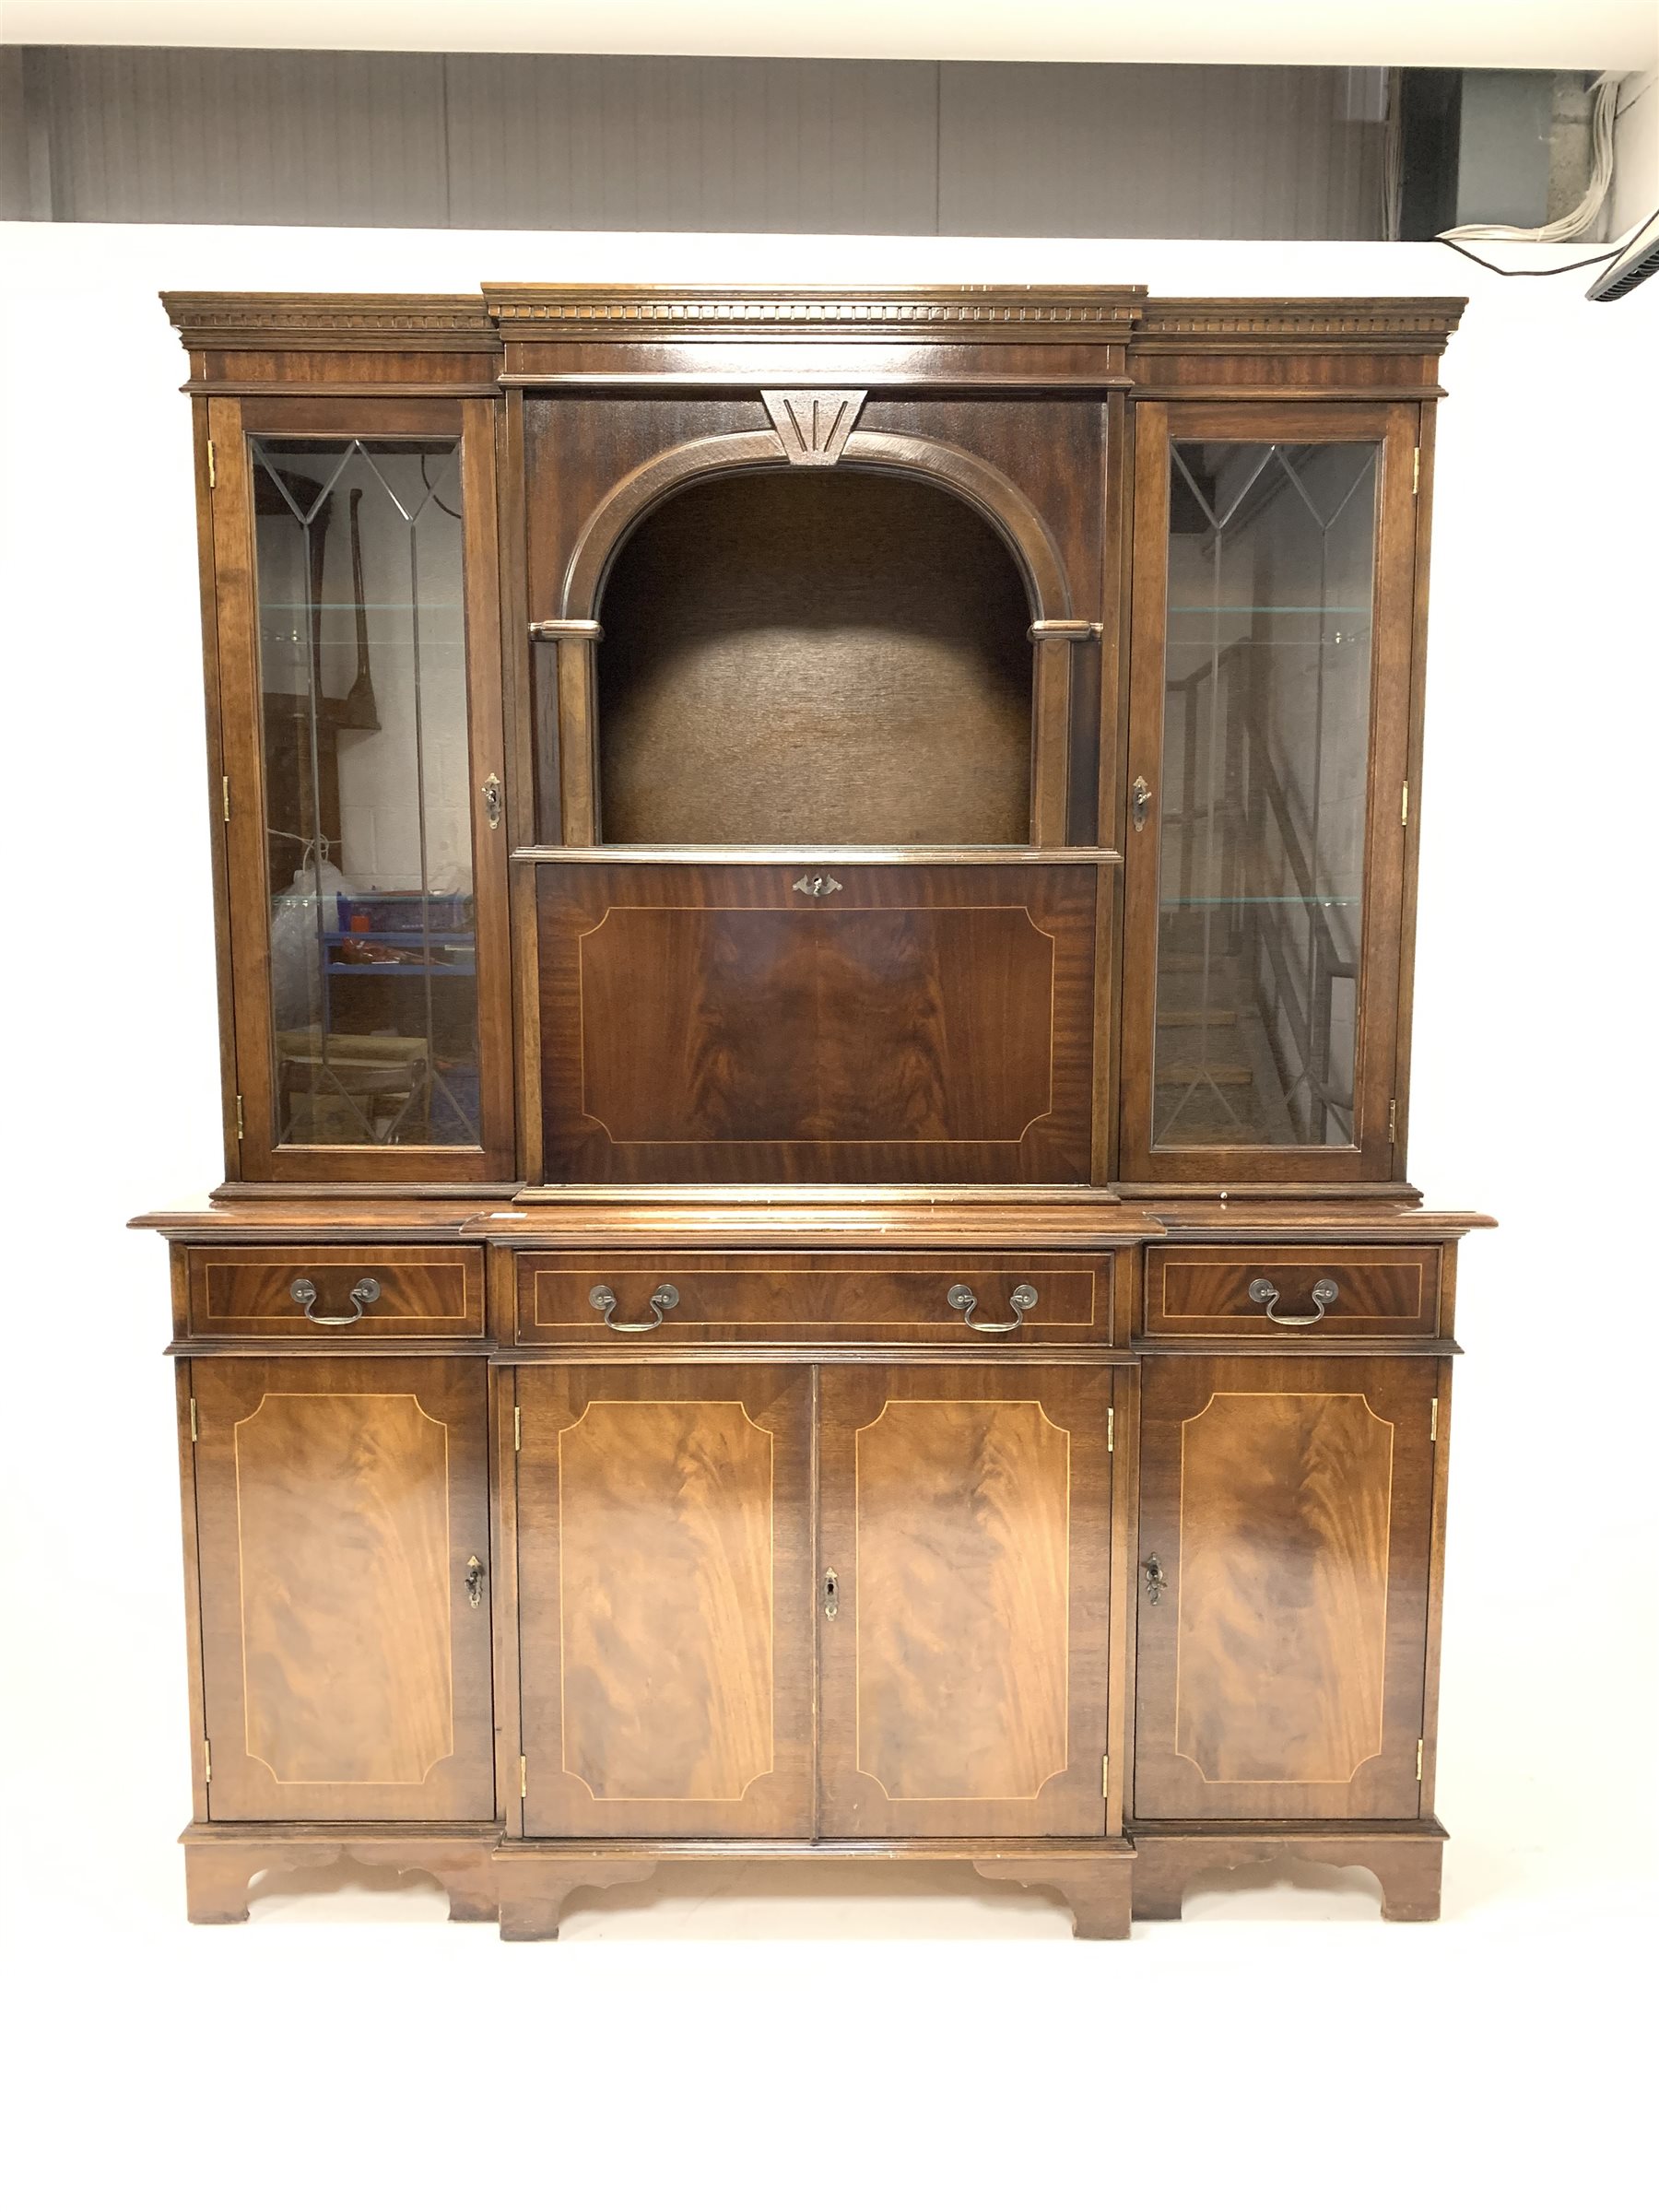 Reproduction mahogany breakfront illuminated cocktail display cabinet, with dentil cornice over glaz